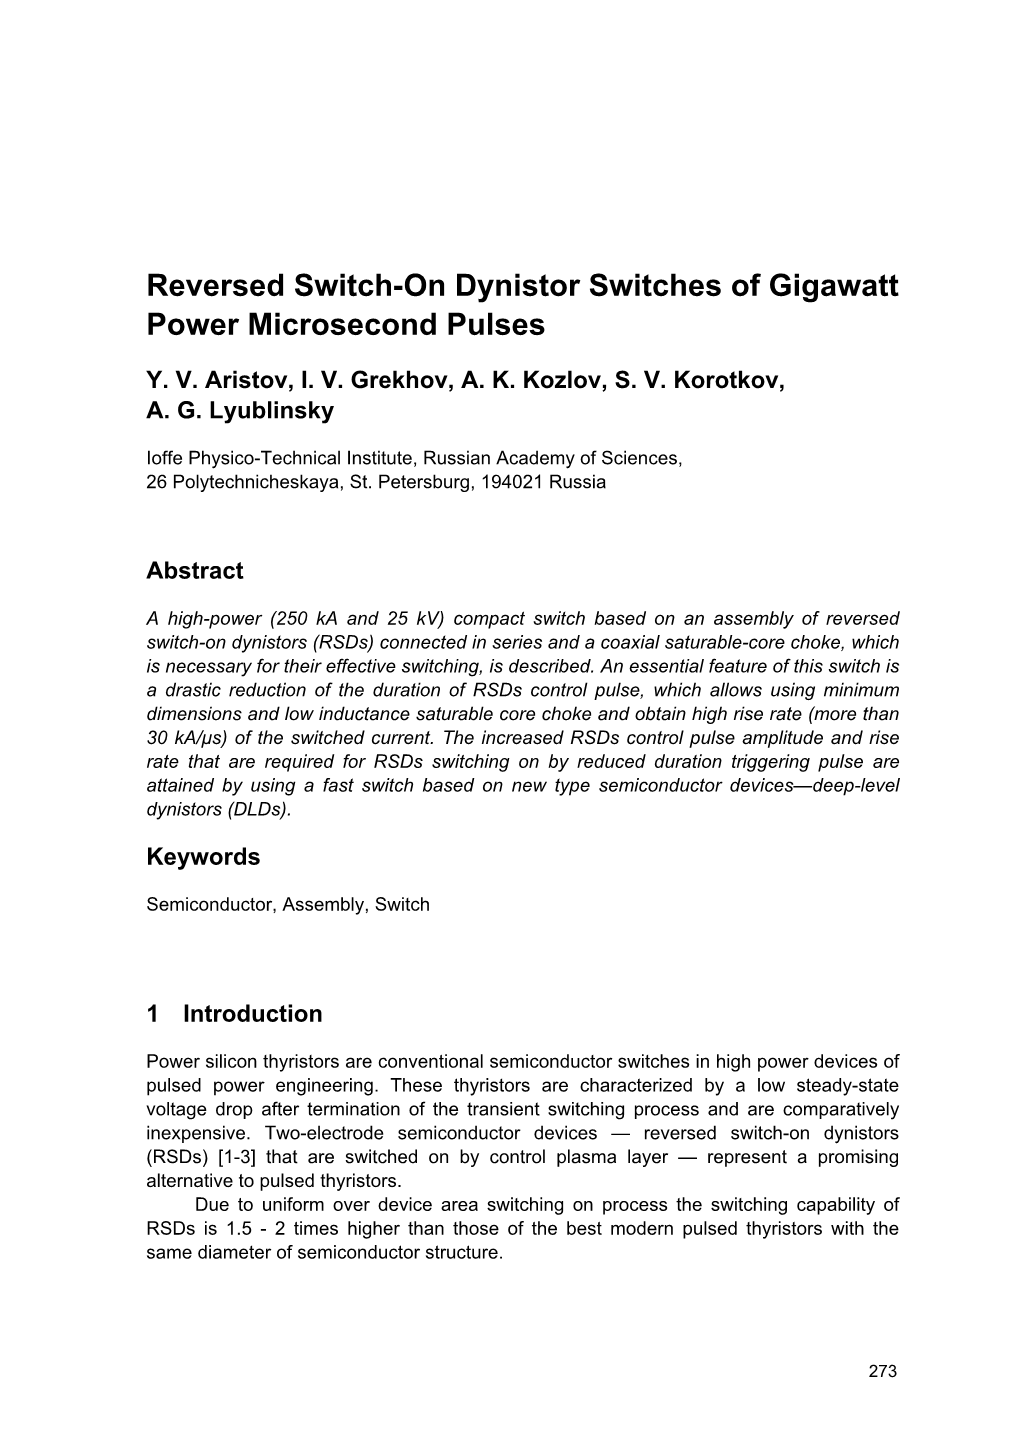 Reversed Switch-On Dynistor Switches of Gigawatt Power Microsecond Pulses